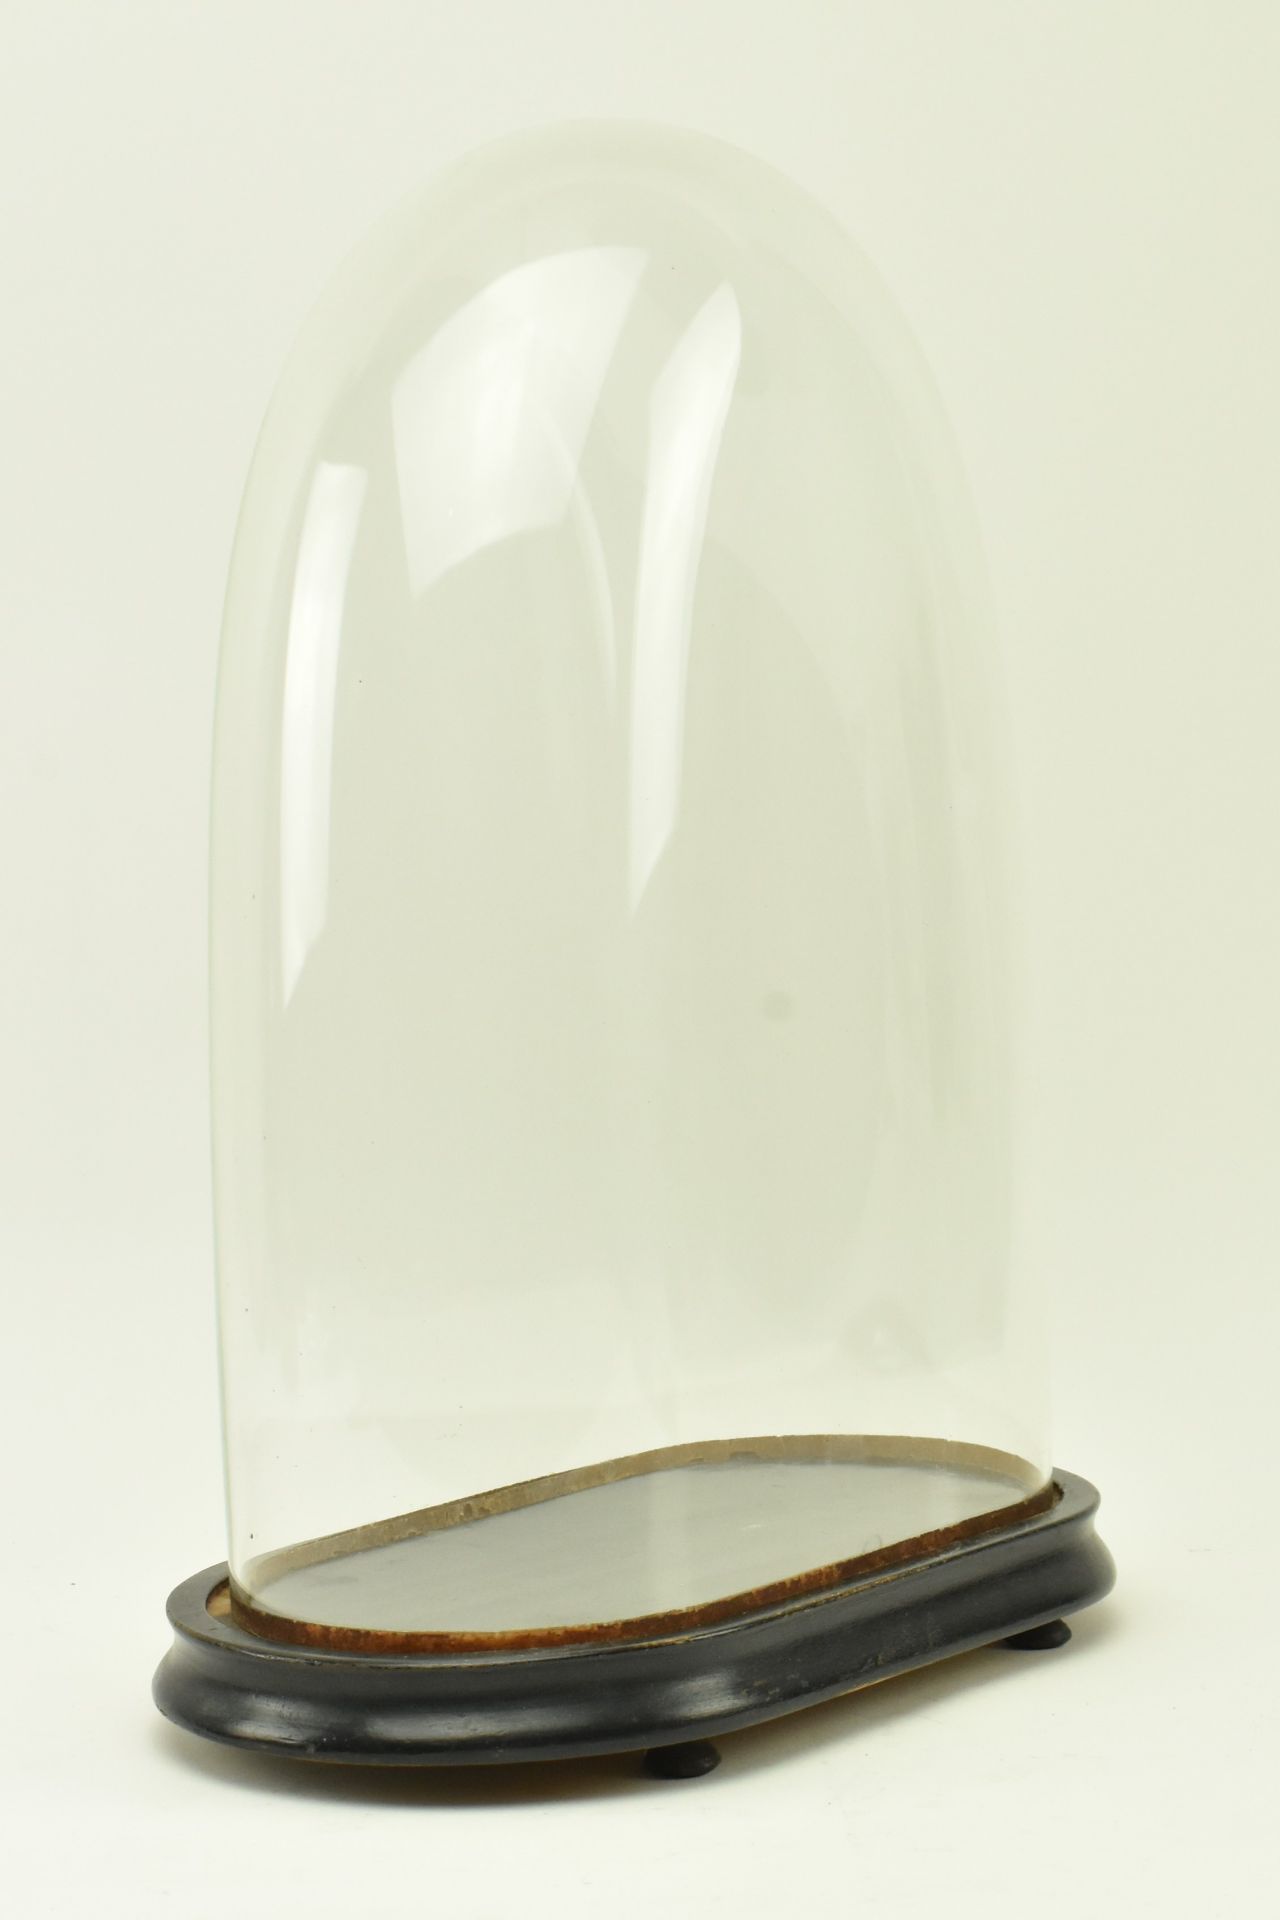 VICTORIAN GLASS DISPLAY DOME AND MAHOGANY STAND - Image 2 of 5